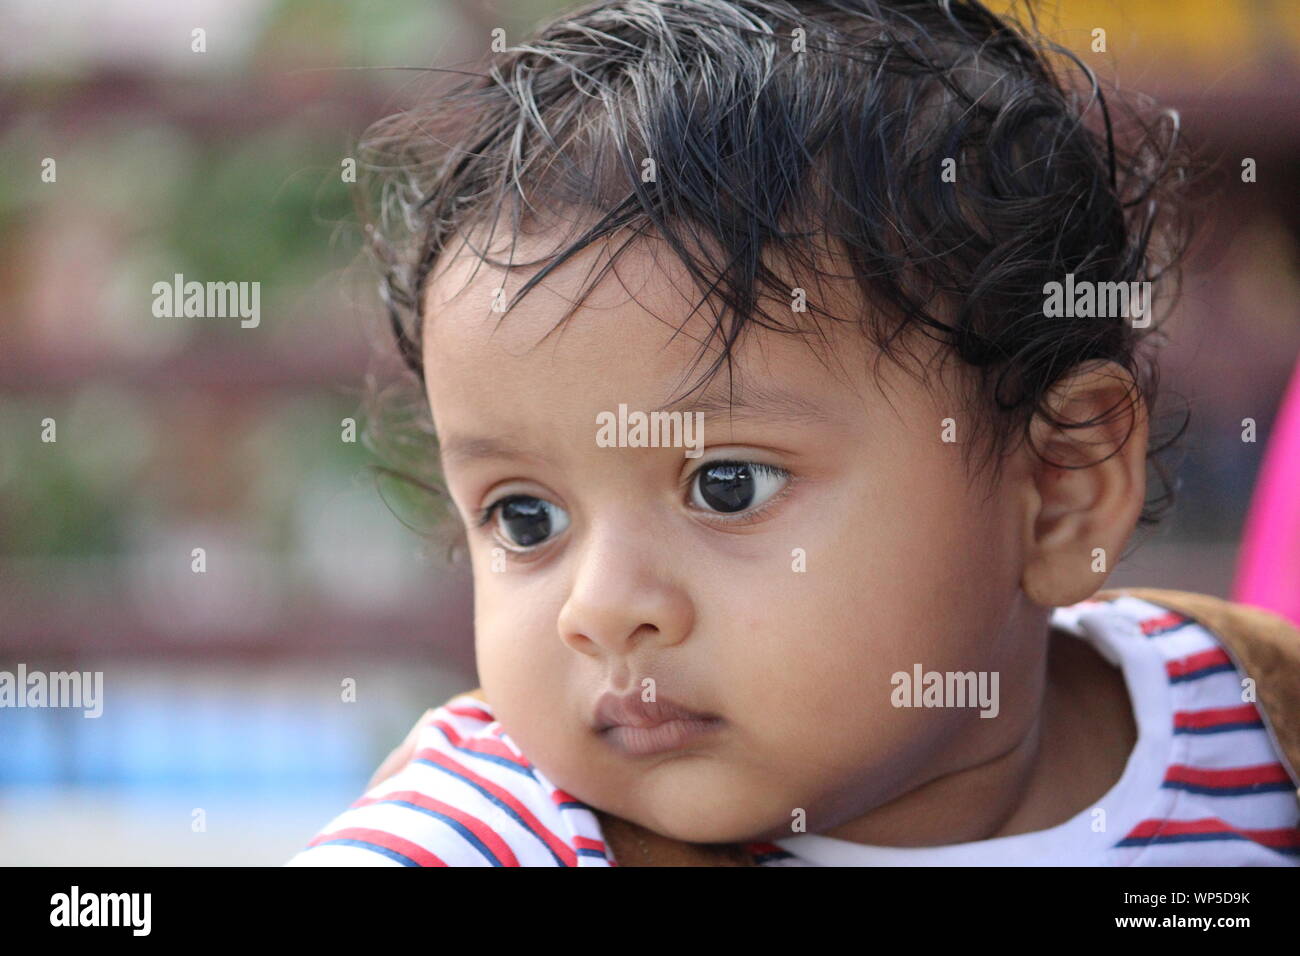 Cute Baby Face Stock Photo